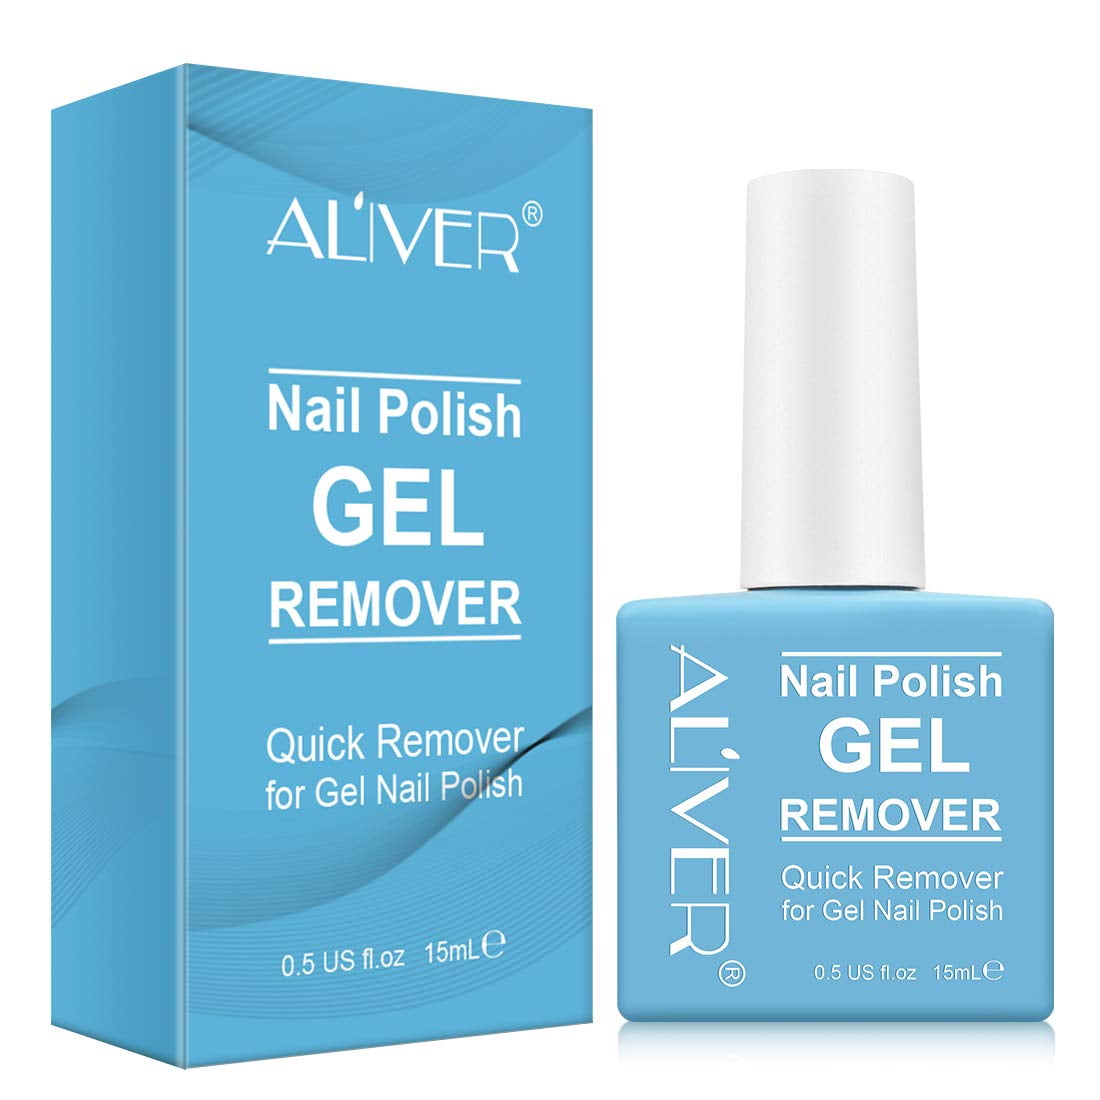 ALIVER Gel Nail Polish Remover for Nails, Gel Polish Remover - Quickly &  Easily Removes Gel Nail Polish Within 2-4 Minutes, No-irritating,  Fl Oz  